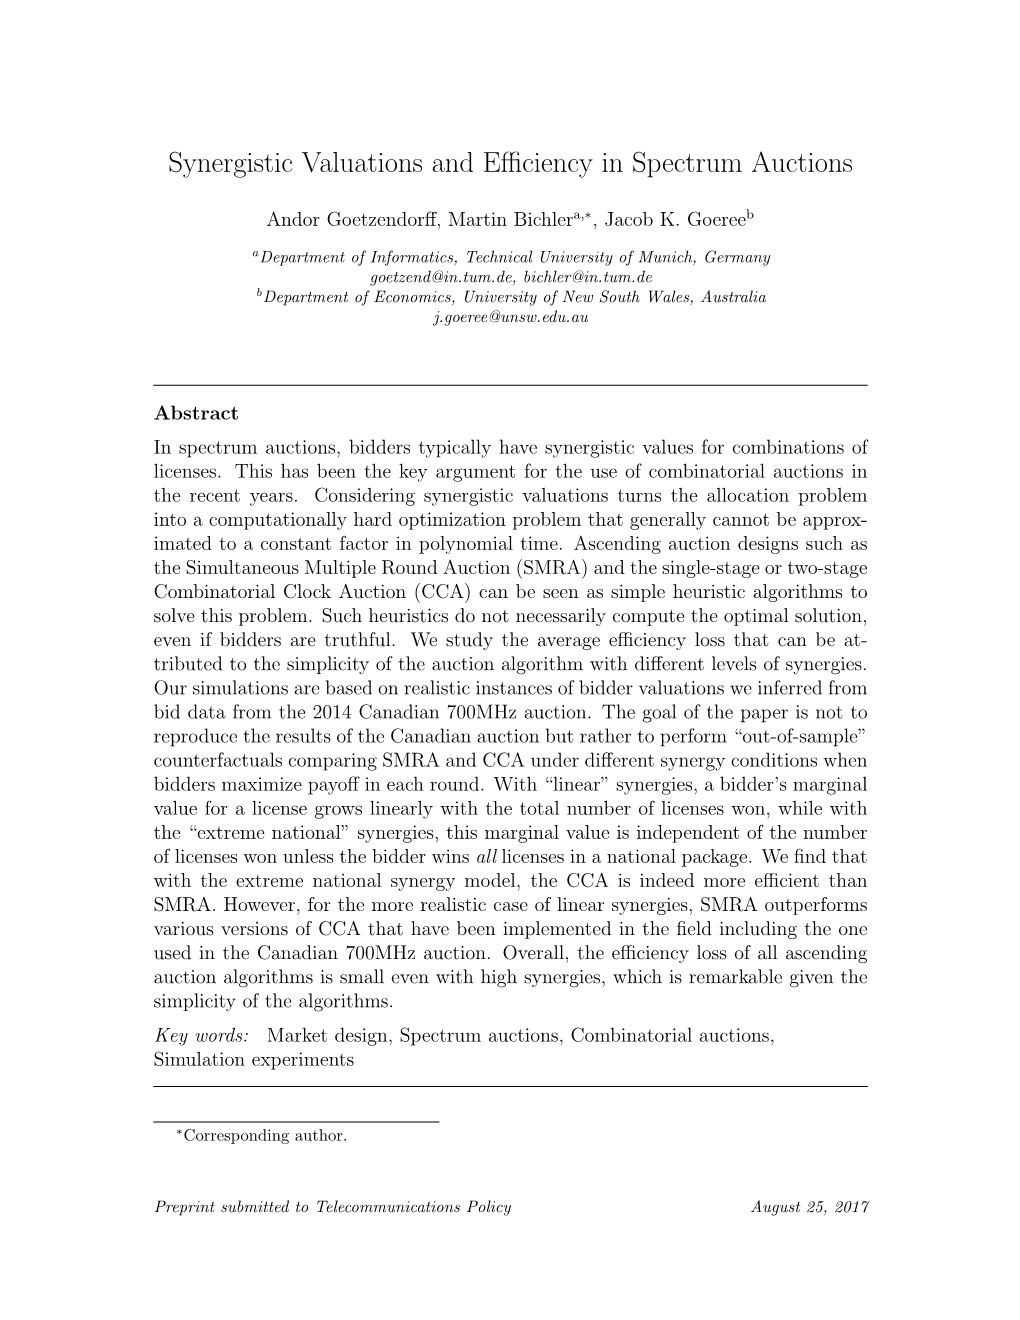 Synergistic Valuations and Efficiency in Spectrum Auctions